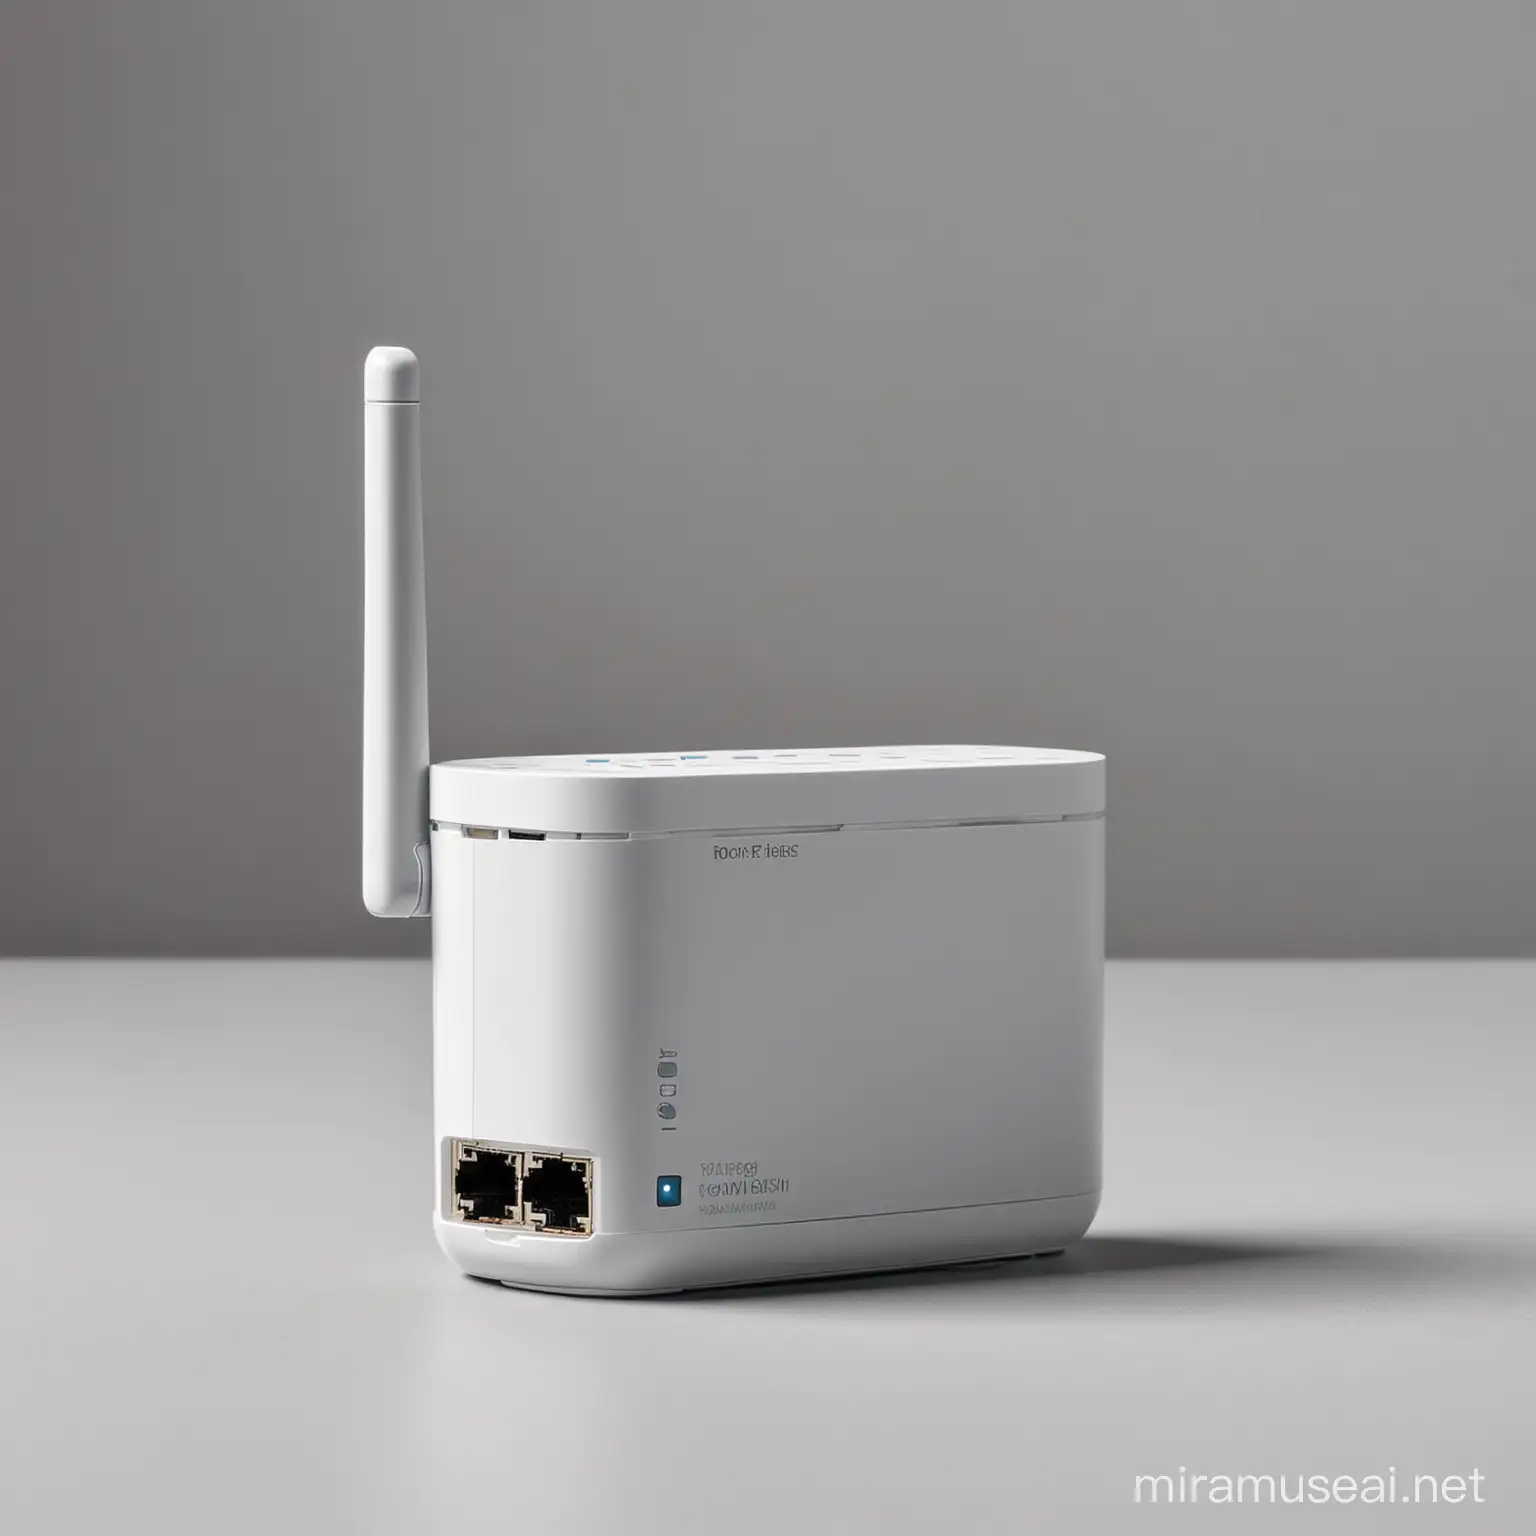 Portable Router on Gray Background